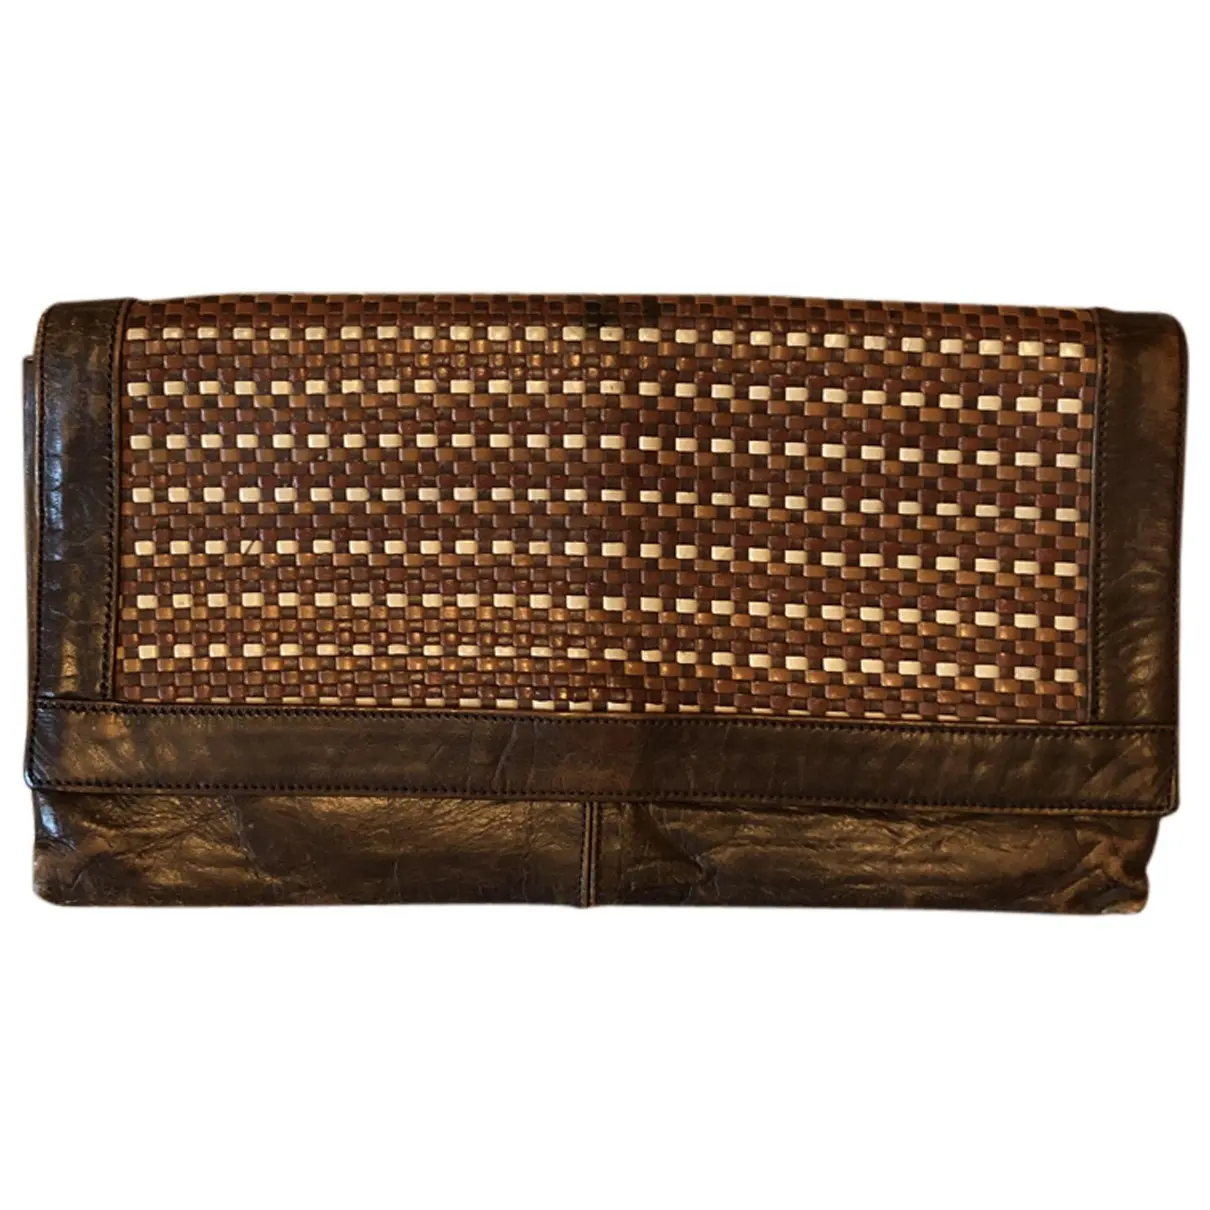 Leather clutch bag Mulberry - Vintage